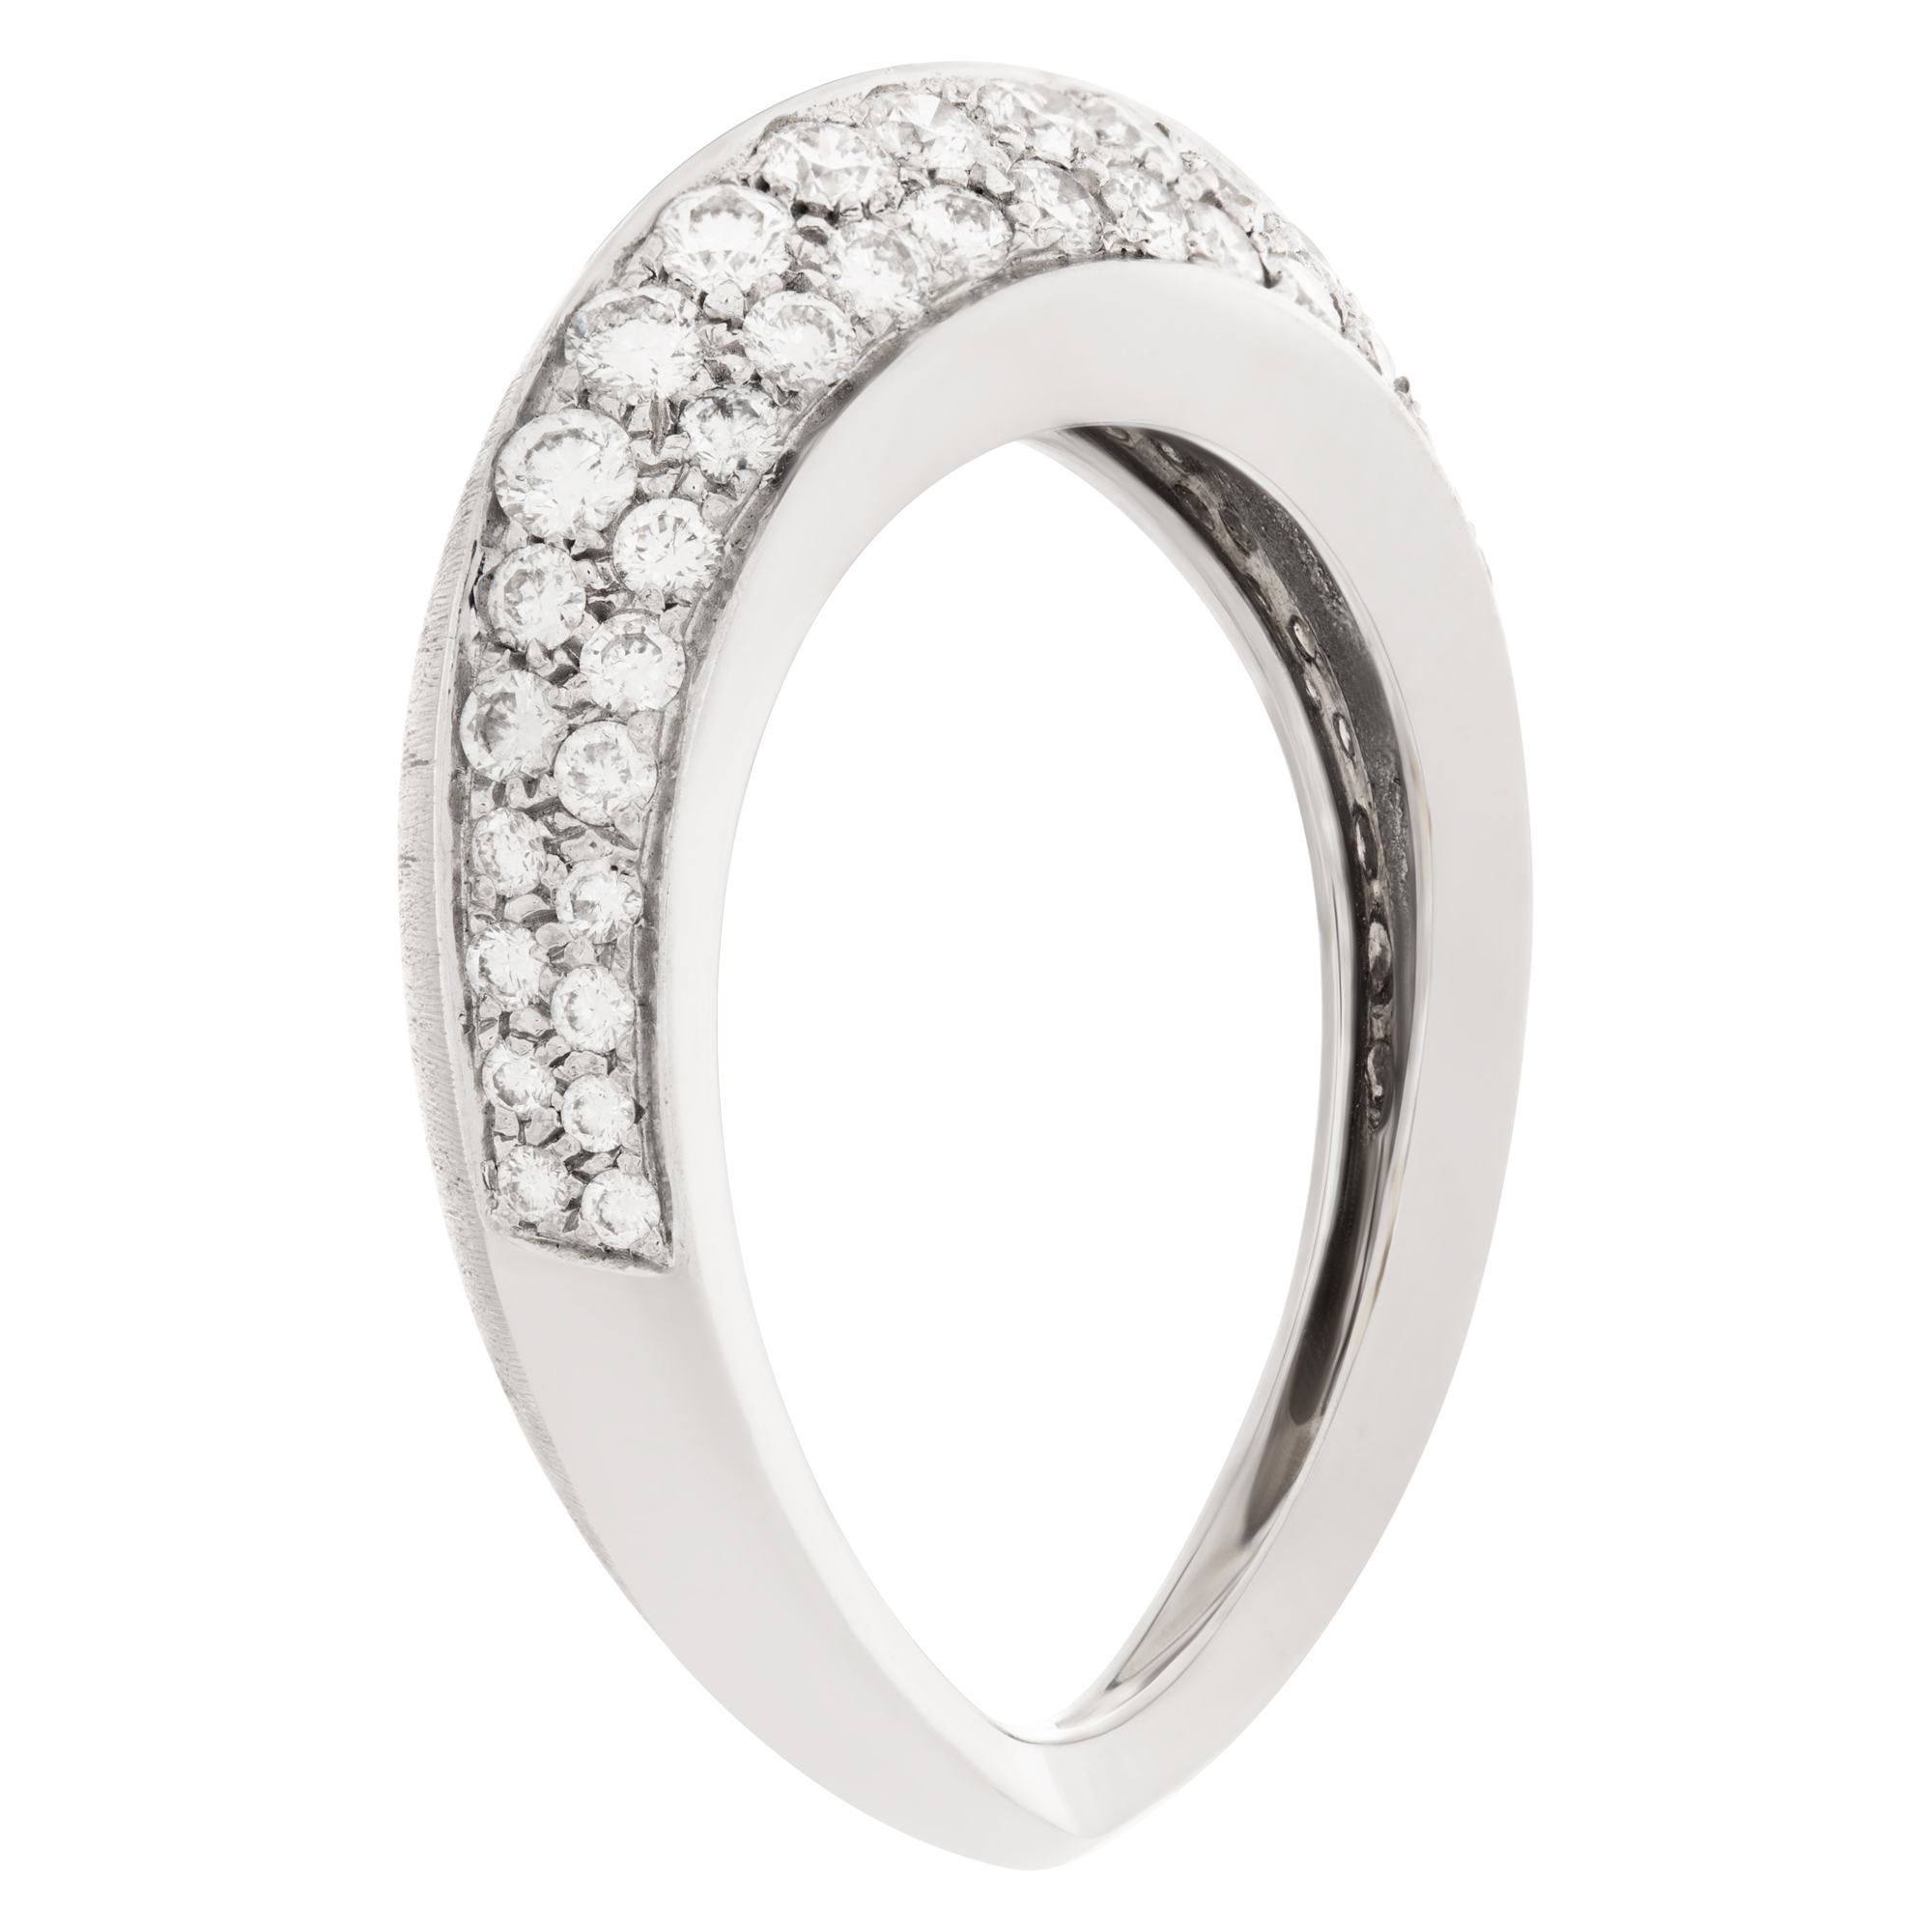 Domed diamond ring in 18k matte white gold. 1.00 carats in diamonds. Size 6 image 4